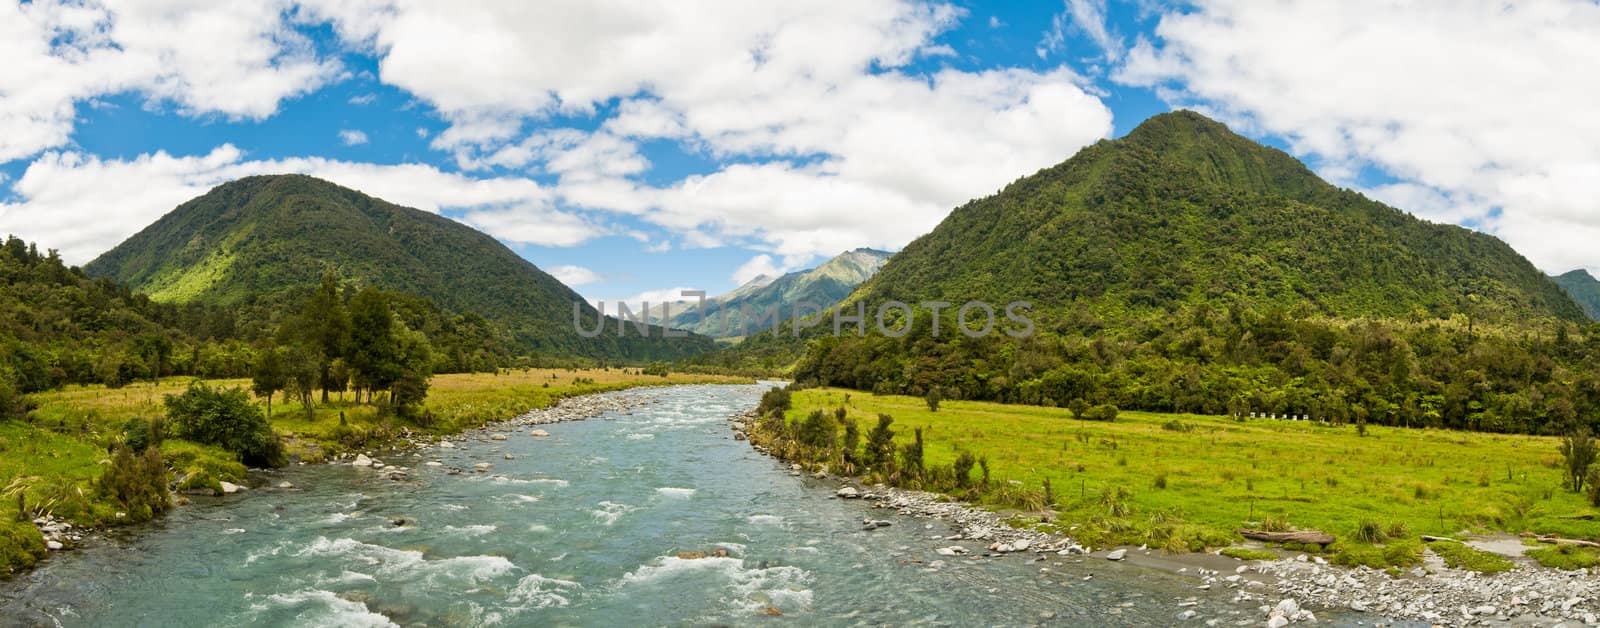 Panorama of a river flowing through a valley